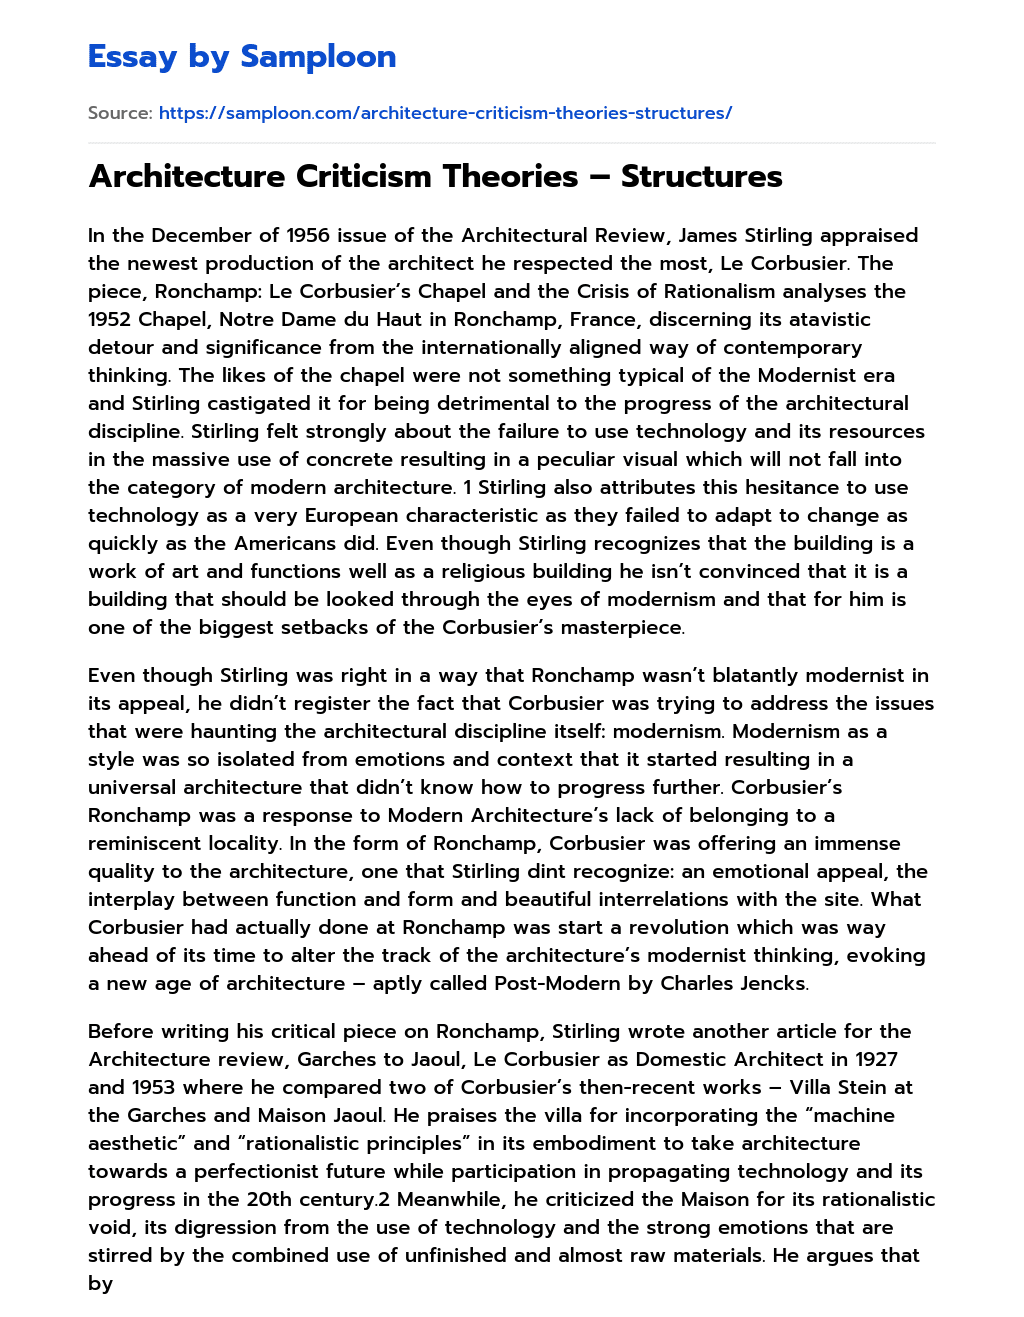 Architecture Criticism Theories – Structures essay